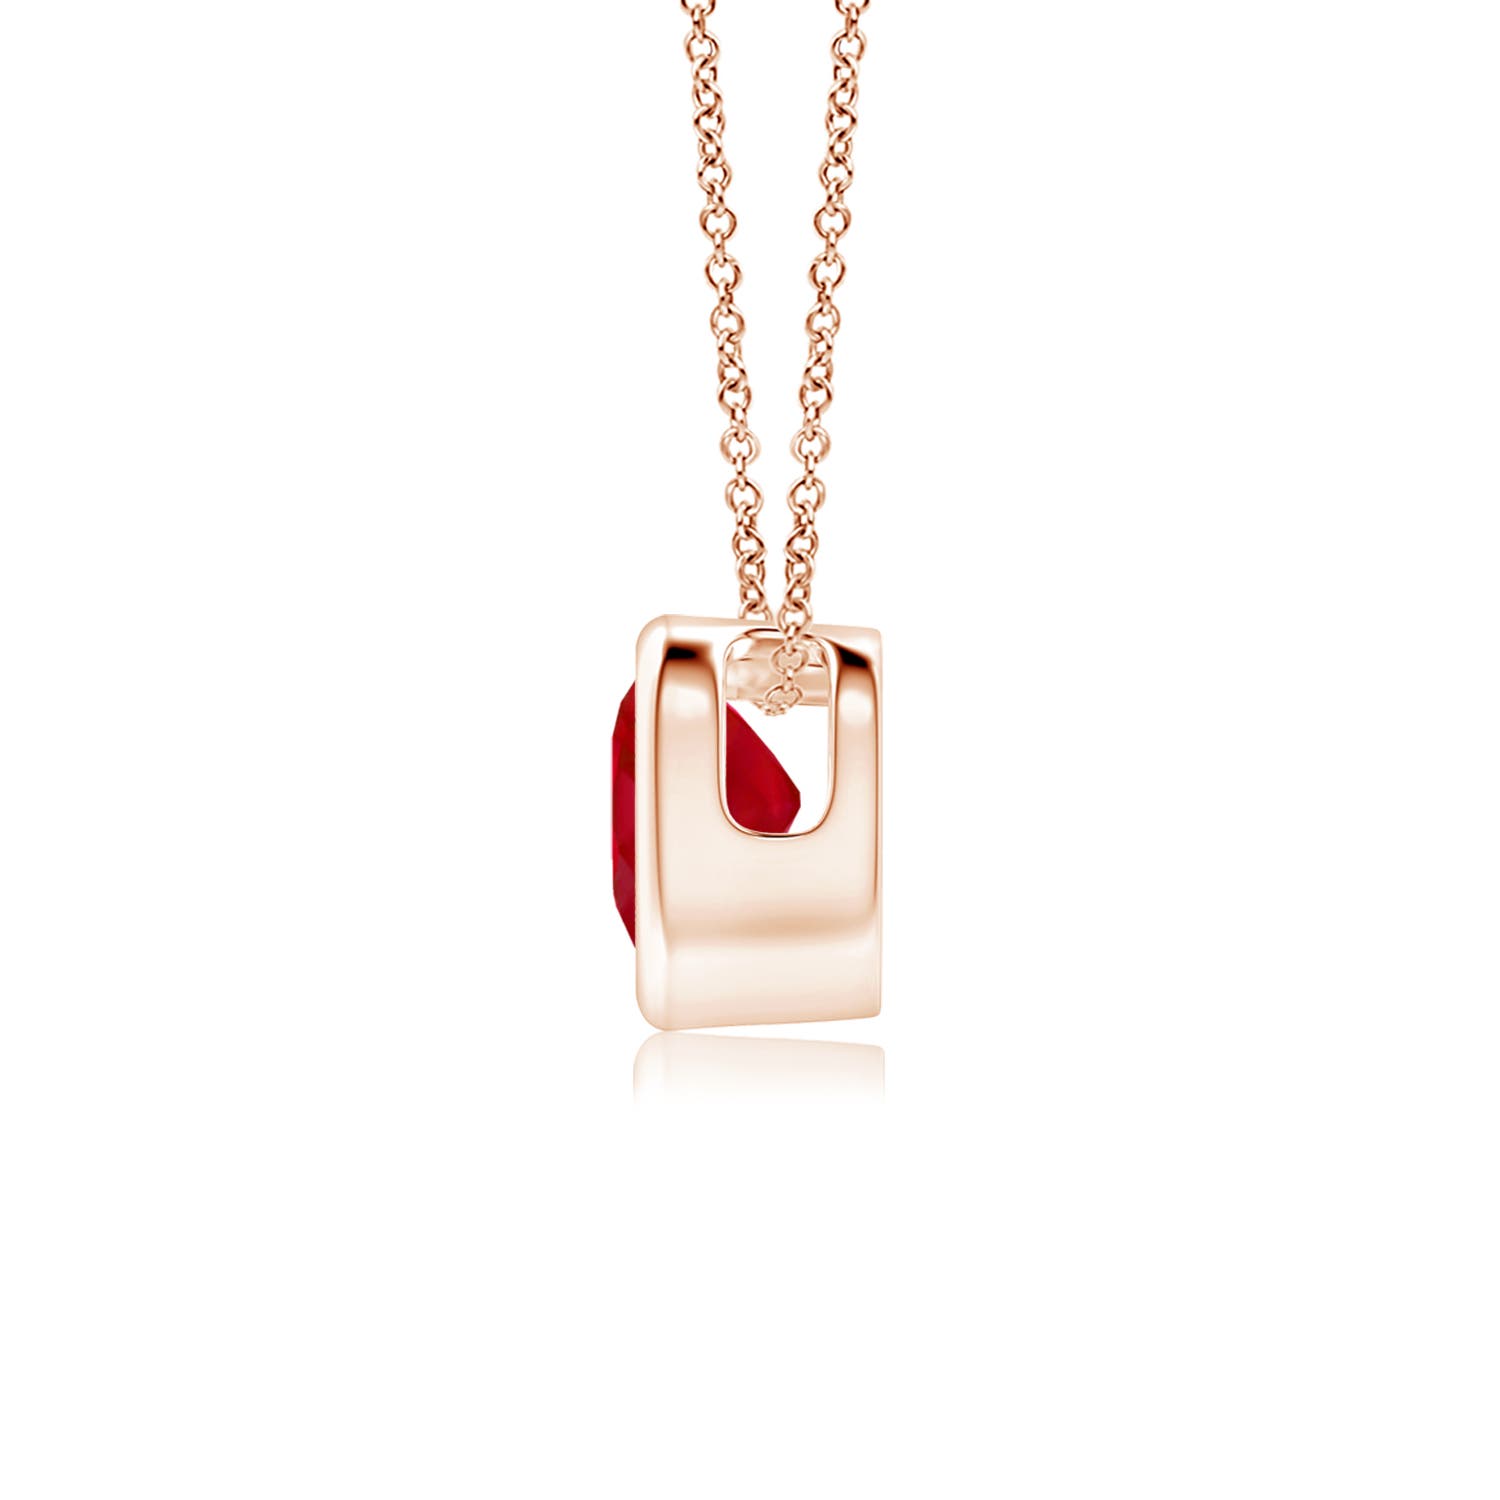 AA - Ruby / 0.3 CT / 14 KT Rose Gold